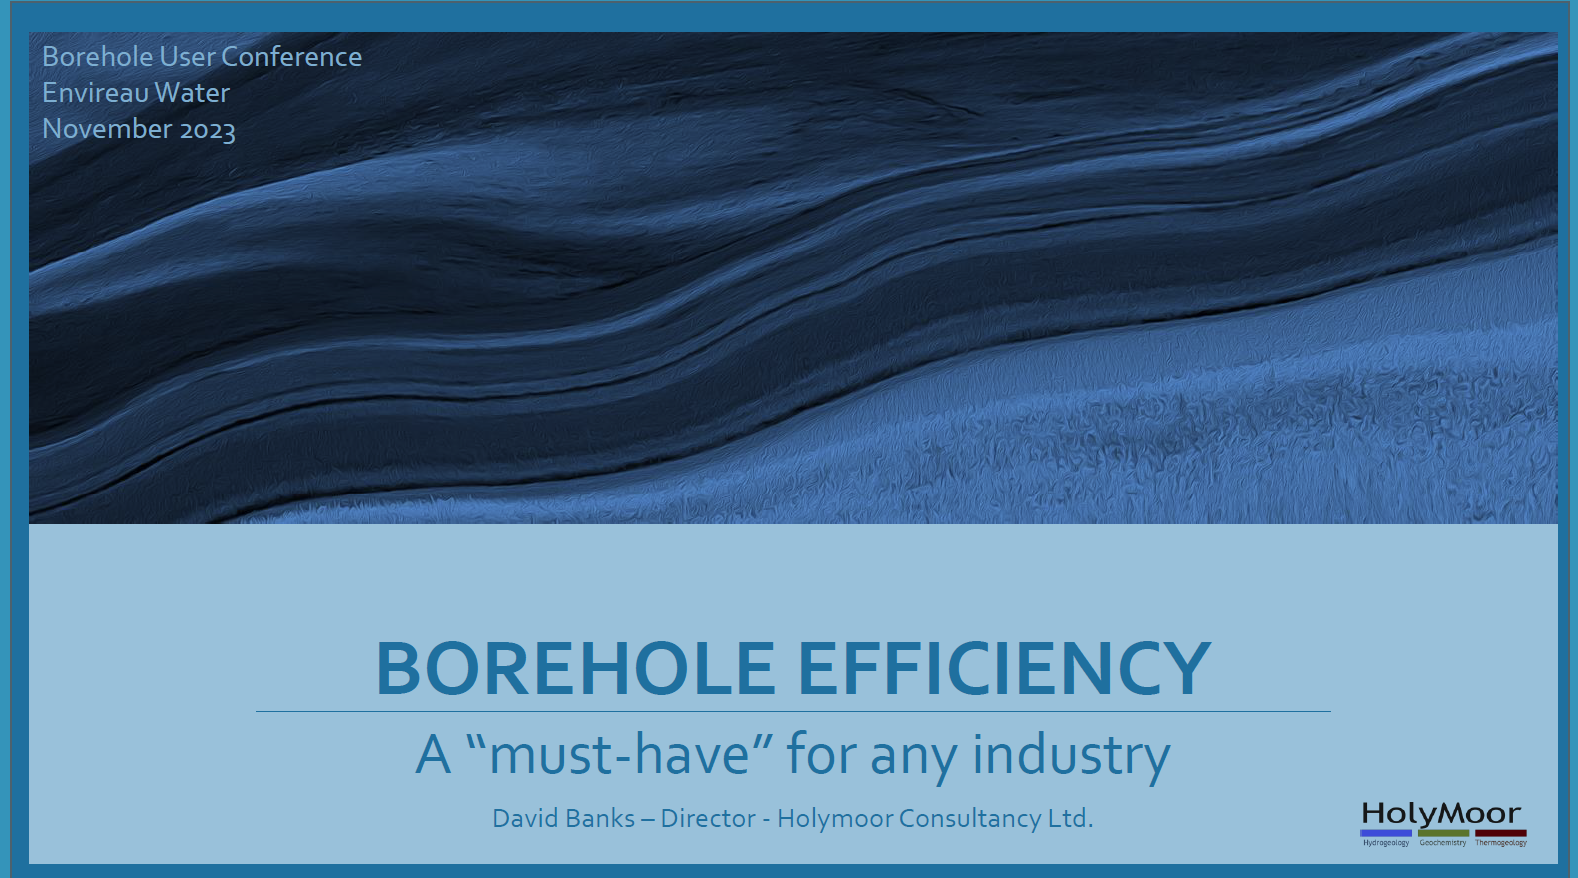 Borehole Efficiency: A Must-Have for Any Industry